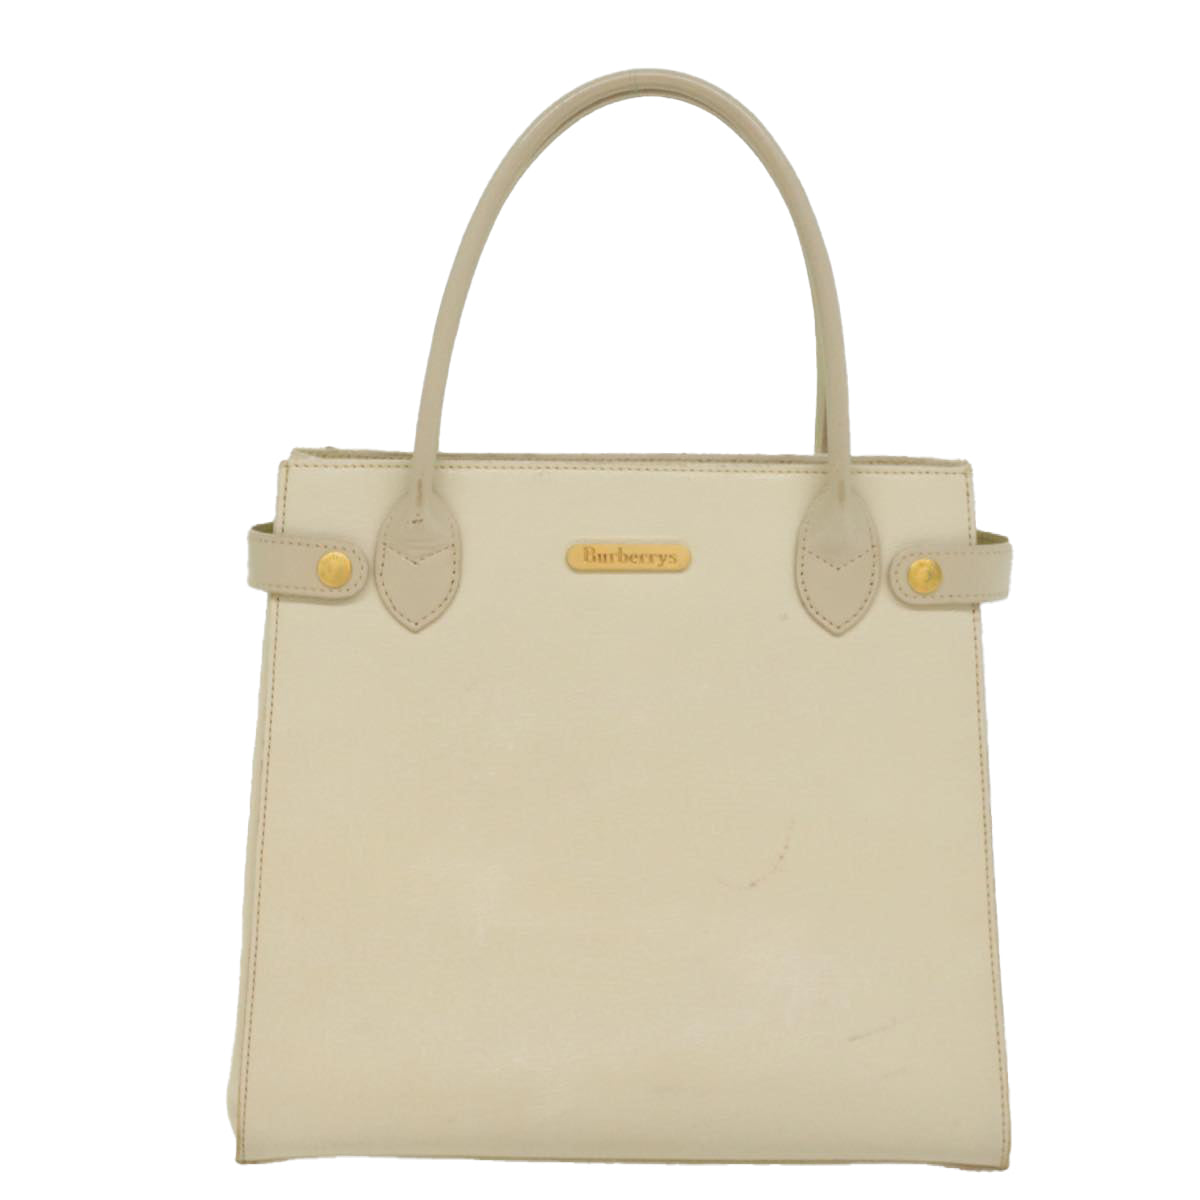 Burberrys Tote Bag Leather White Auth bs8607 - 0